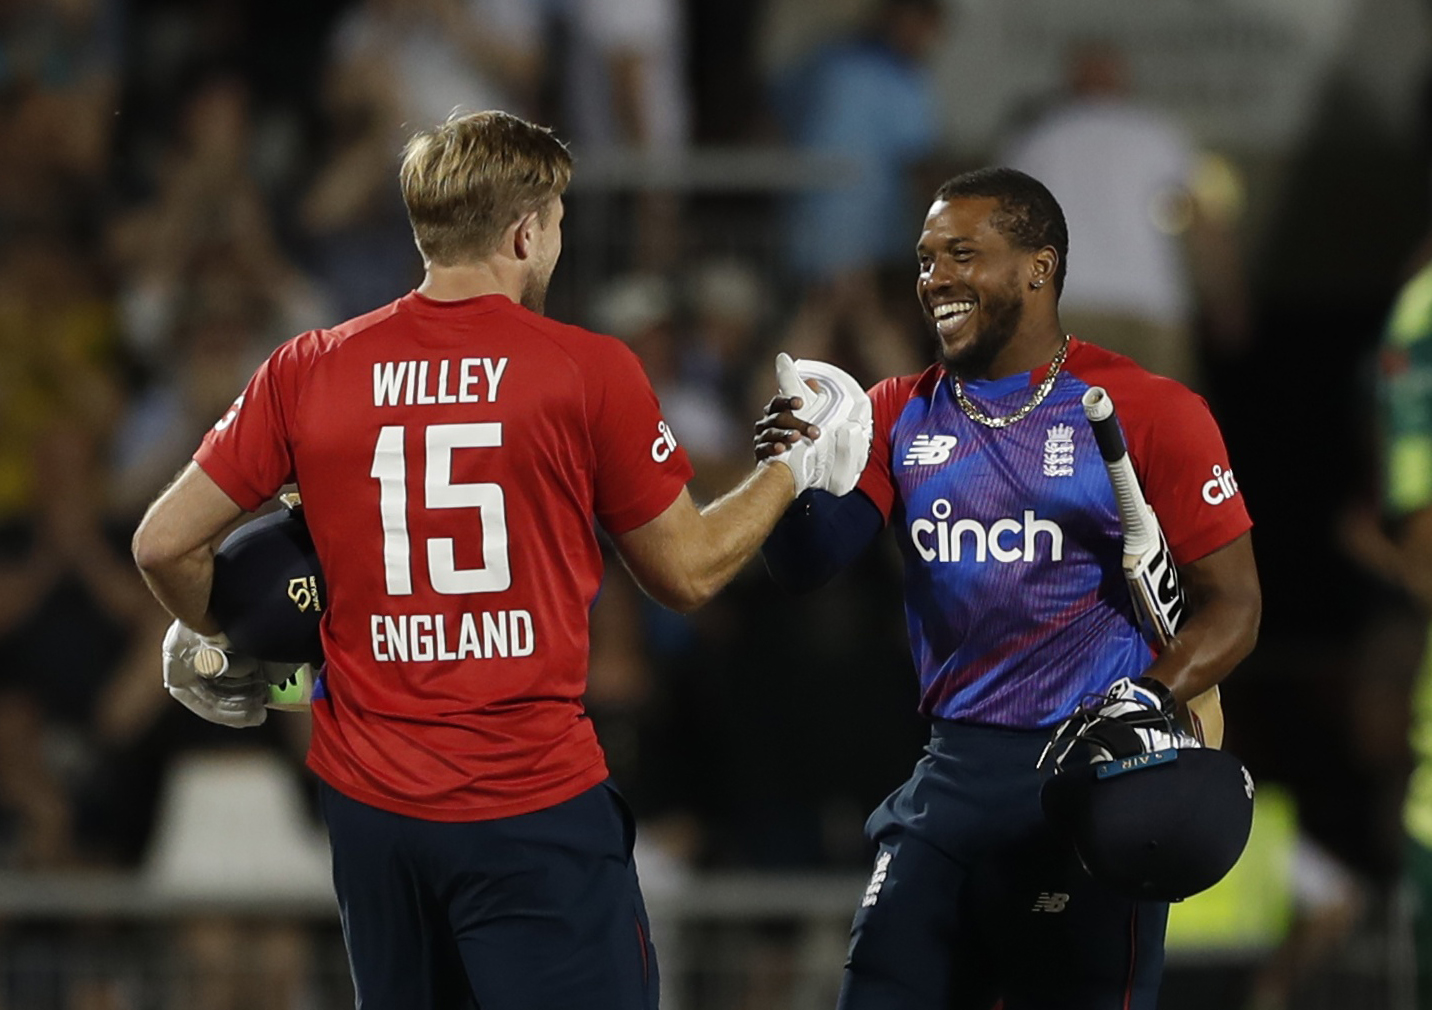 England's David Willey and Chris Jordan celebrate after winning the match Action: Photo via Reuters